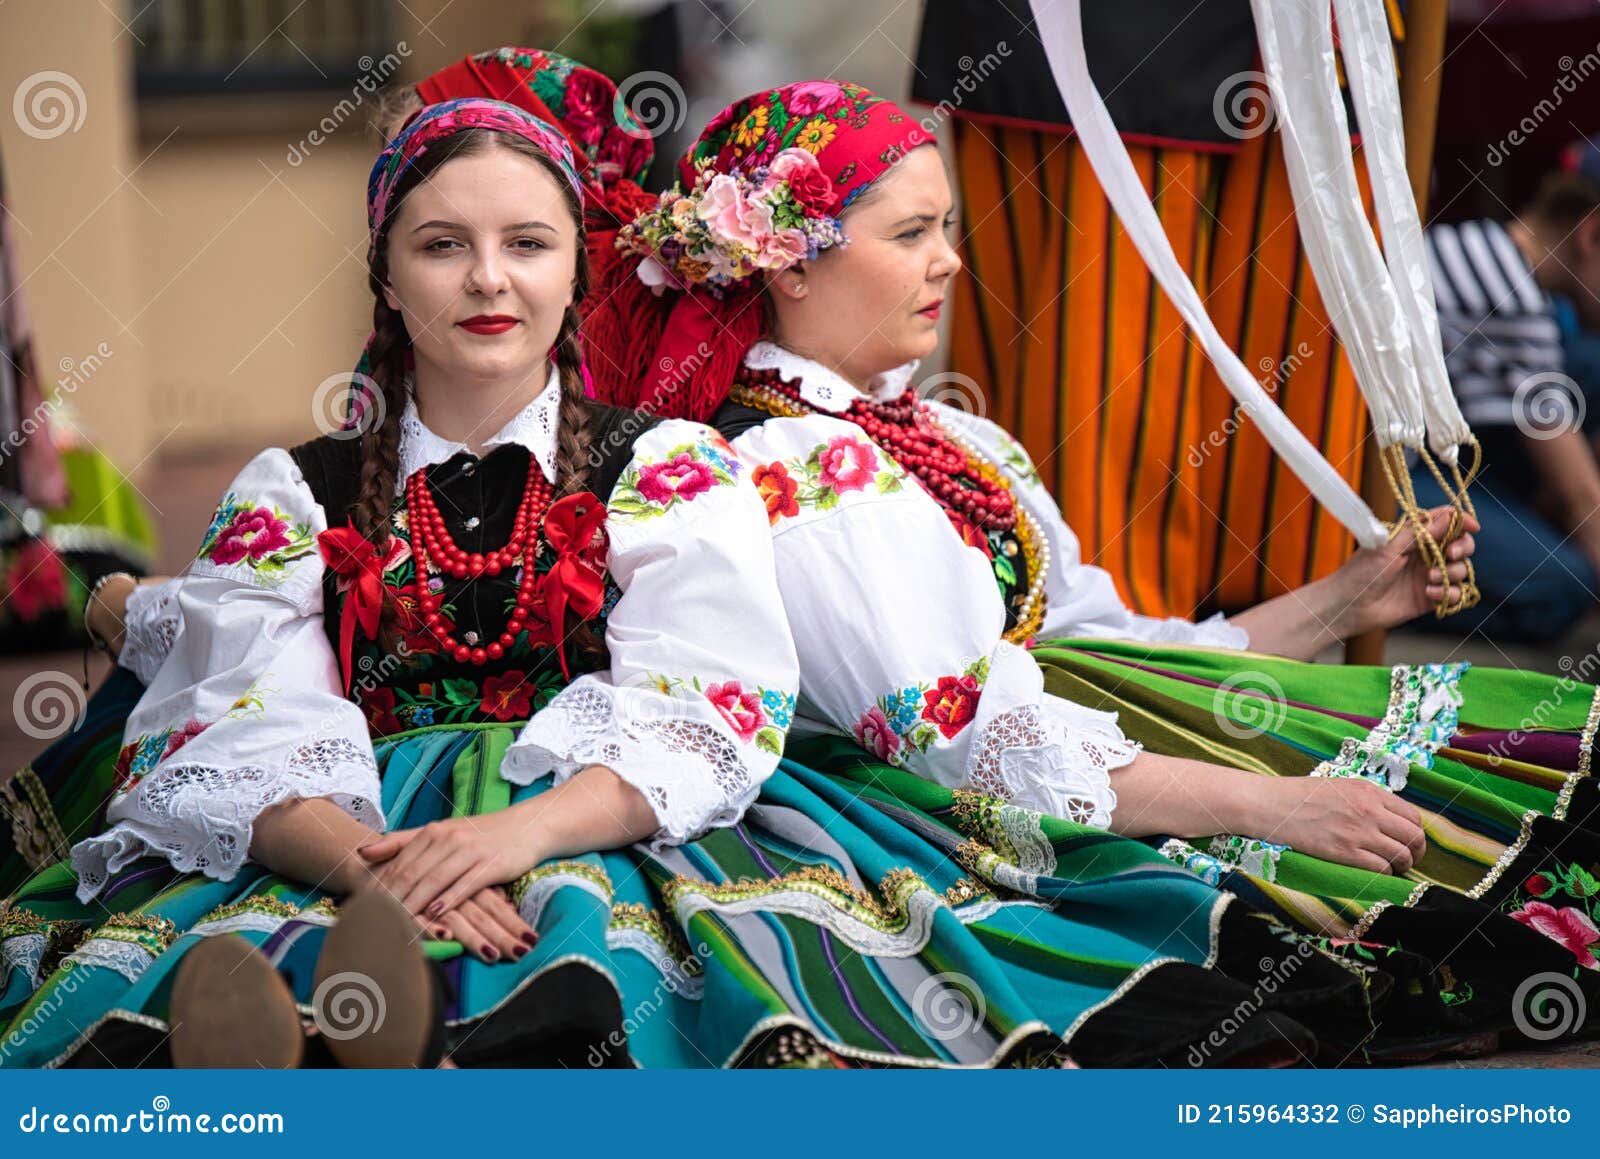 Girls Dressed in Polish National Folk Costumes from Lowicz Region Editorial  Photography - Image of fashion, girl: 215964332